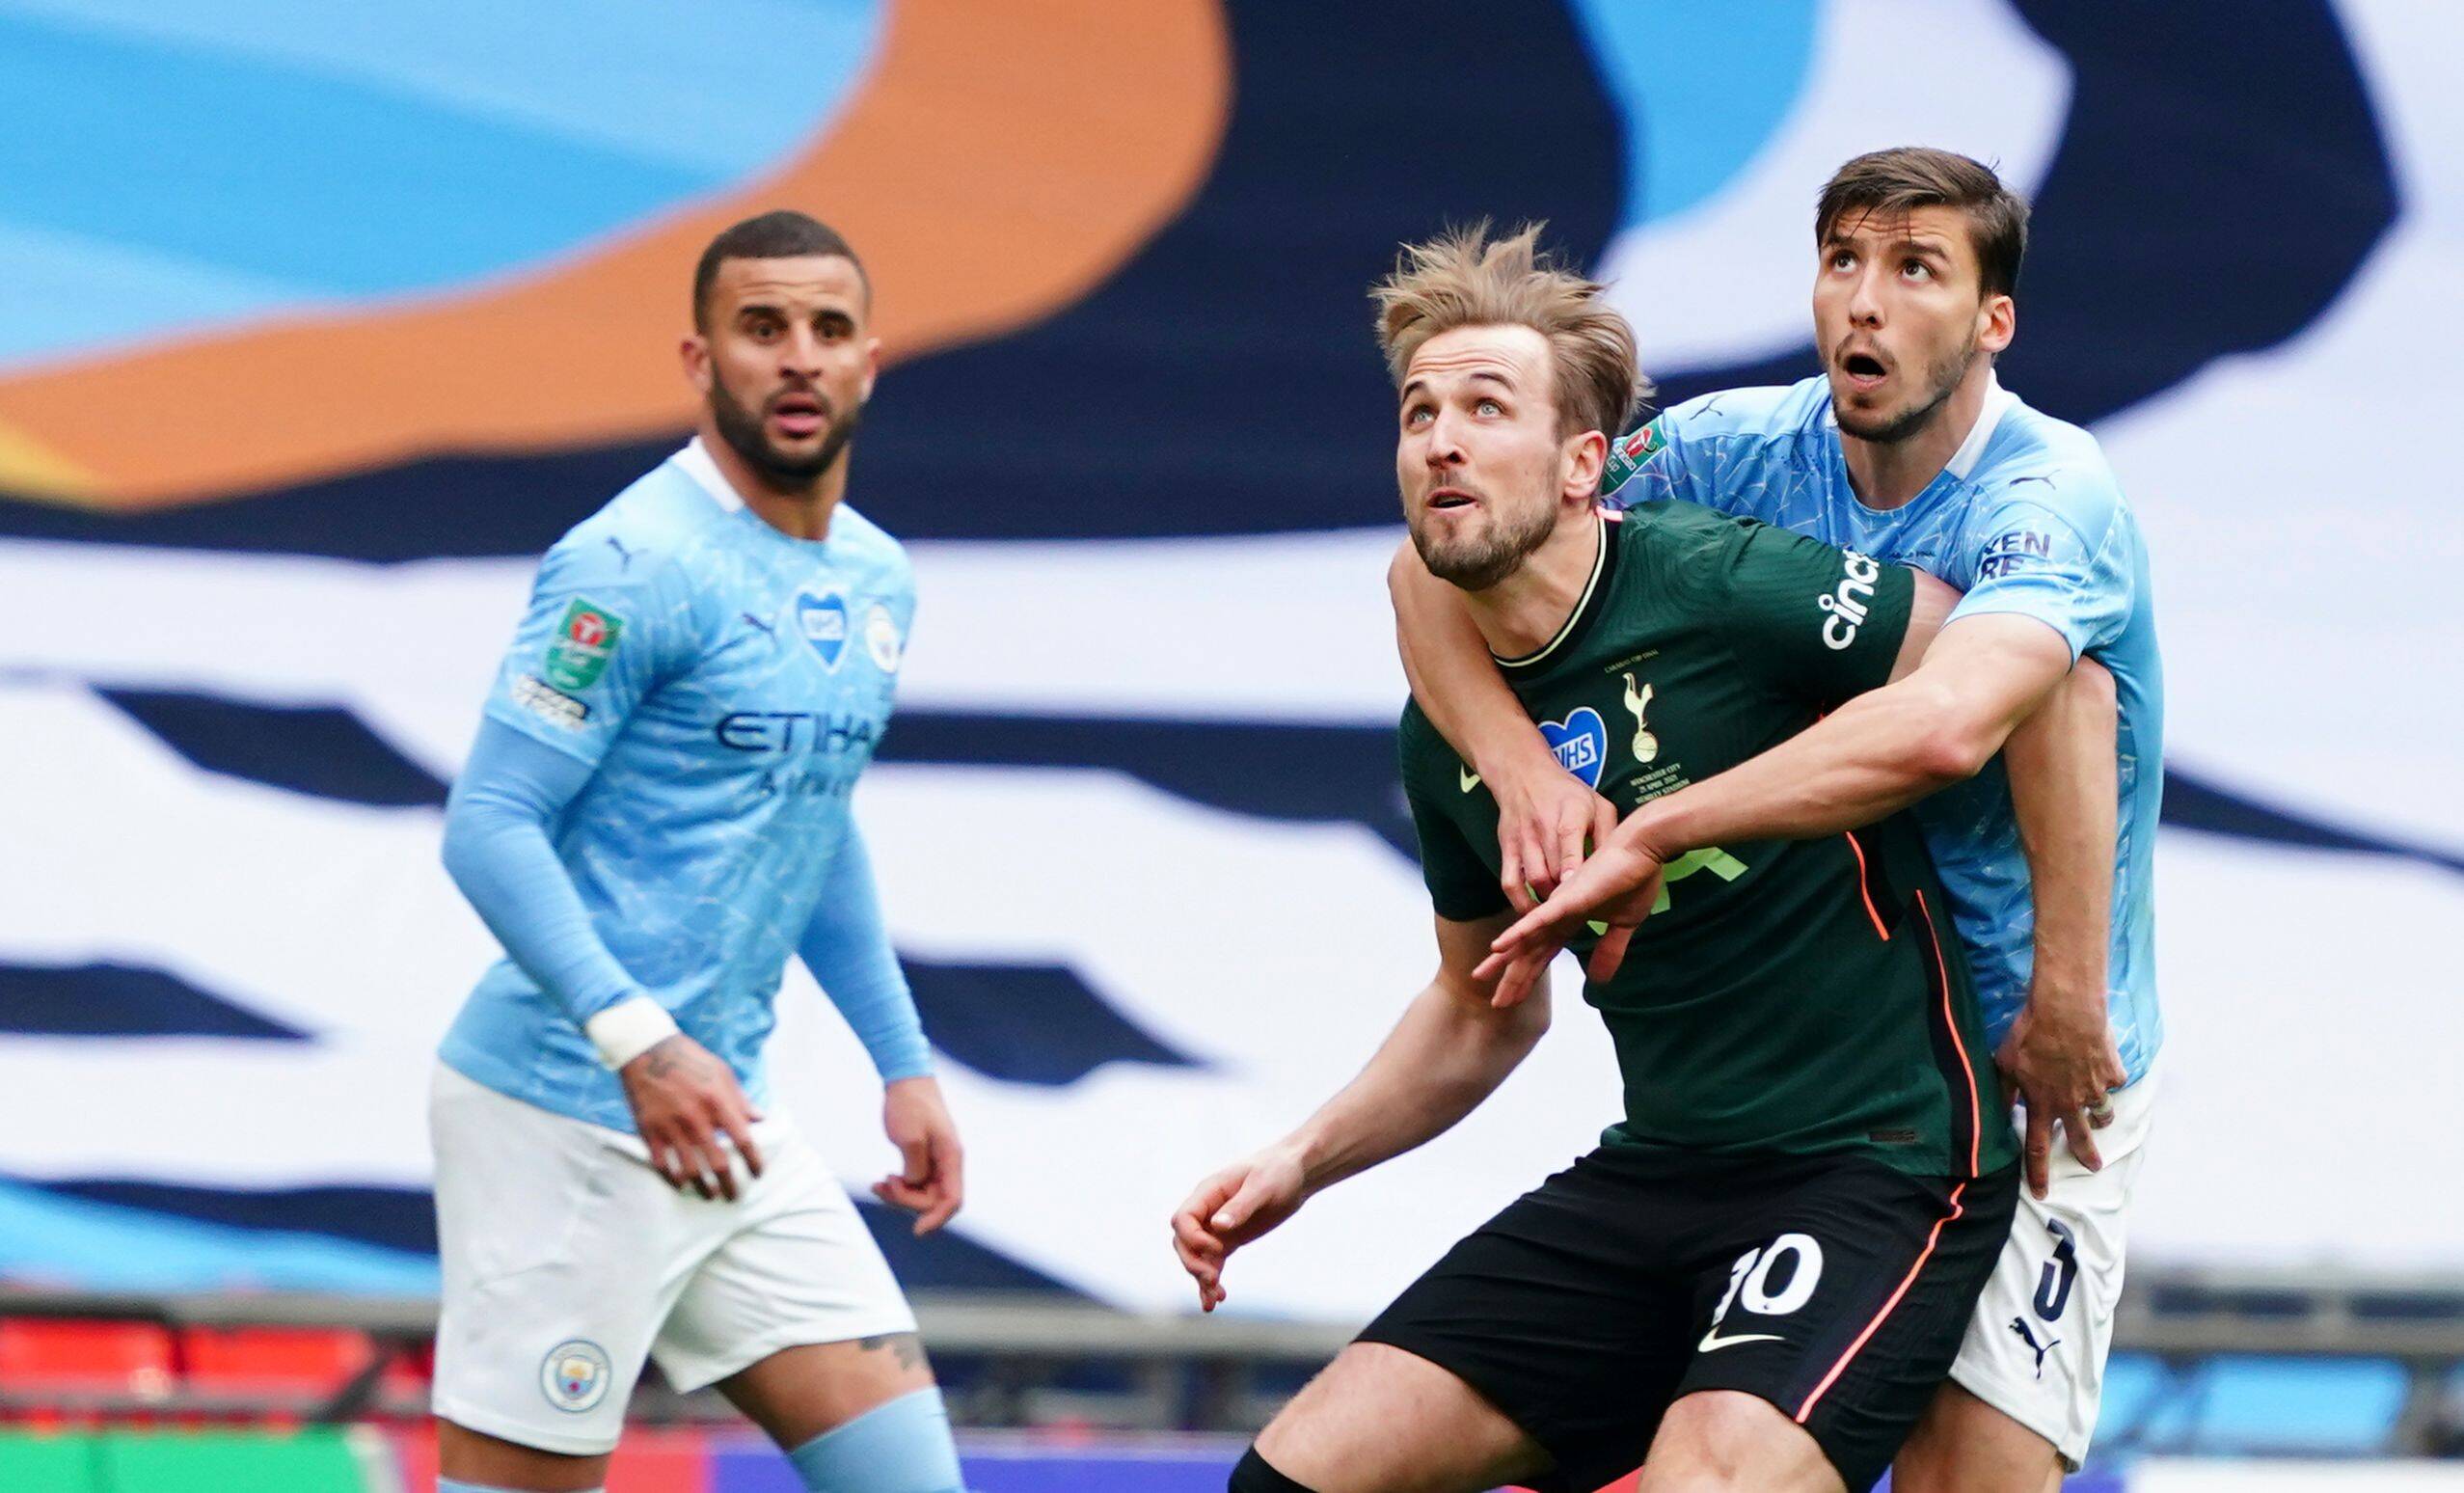 Man City's Dias set to be offered an improved contract (Dias is holding on to Kane in the picture)